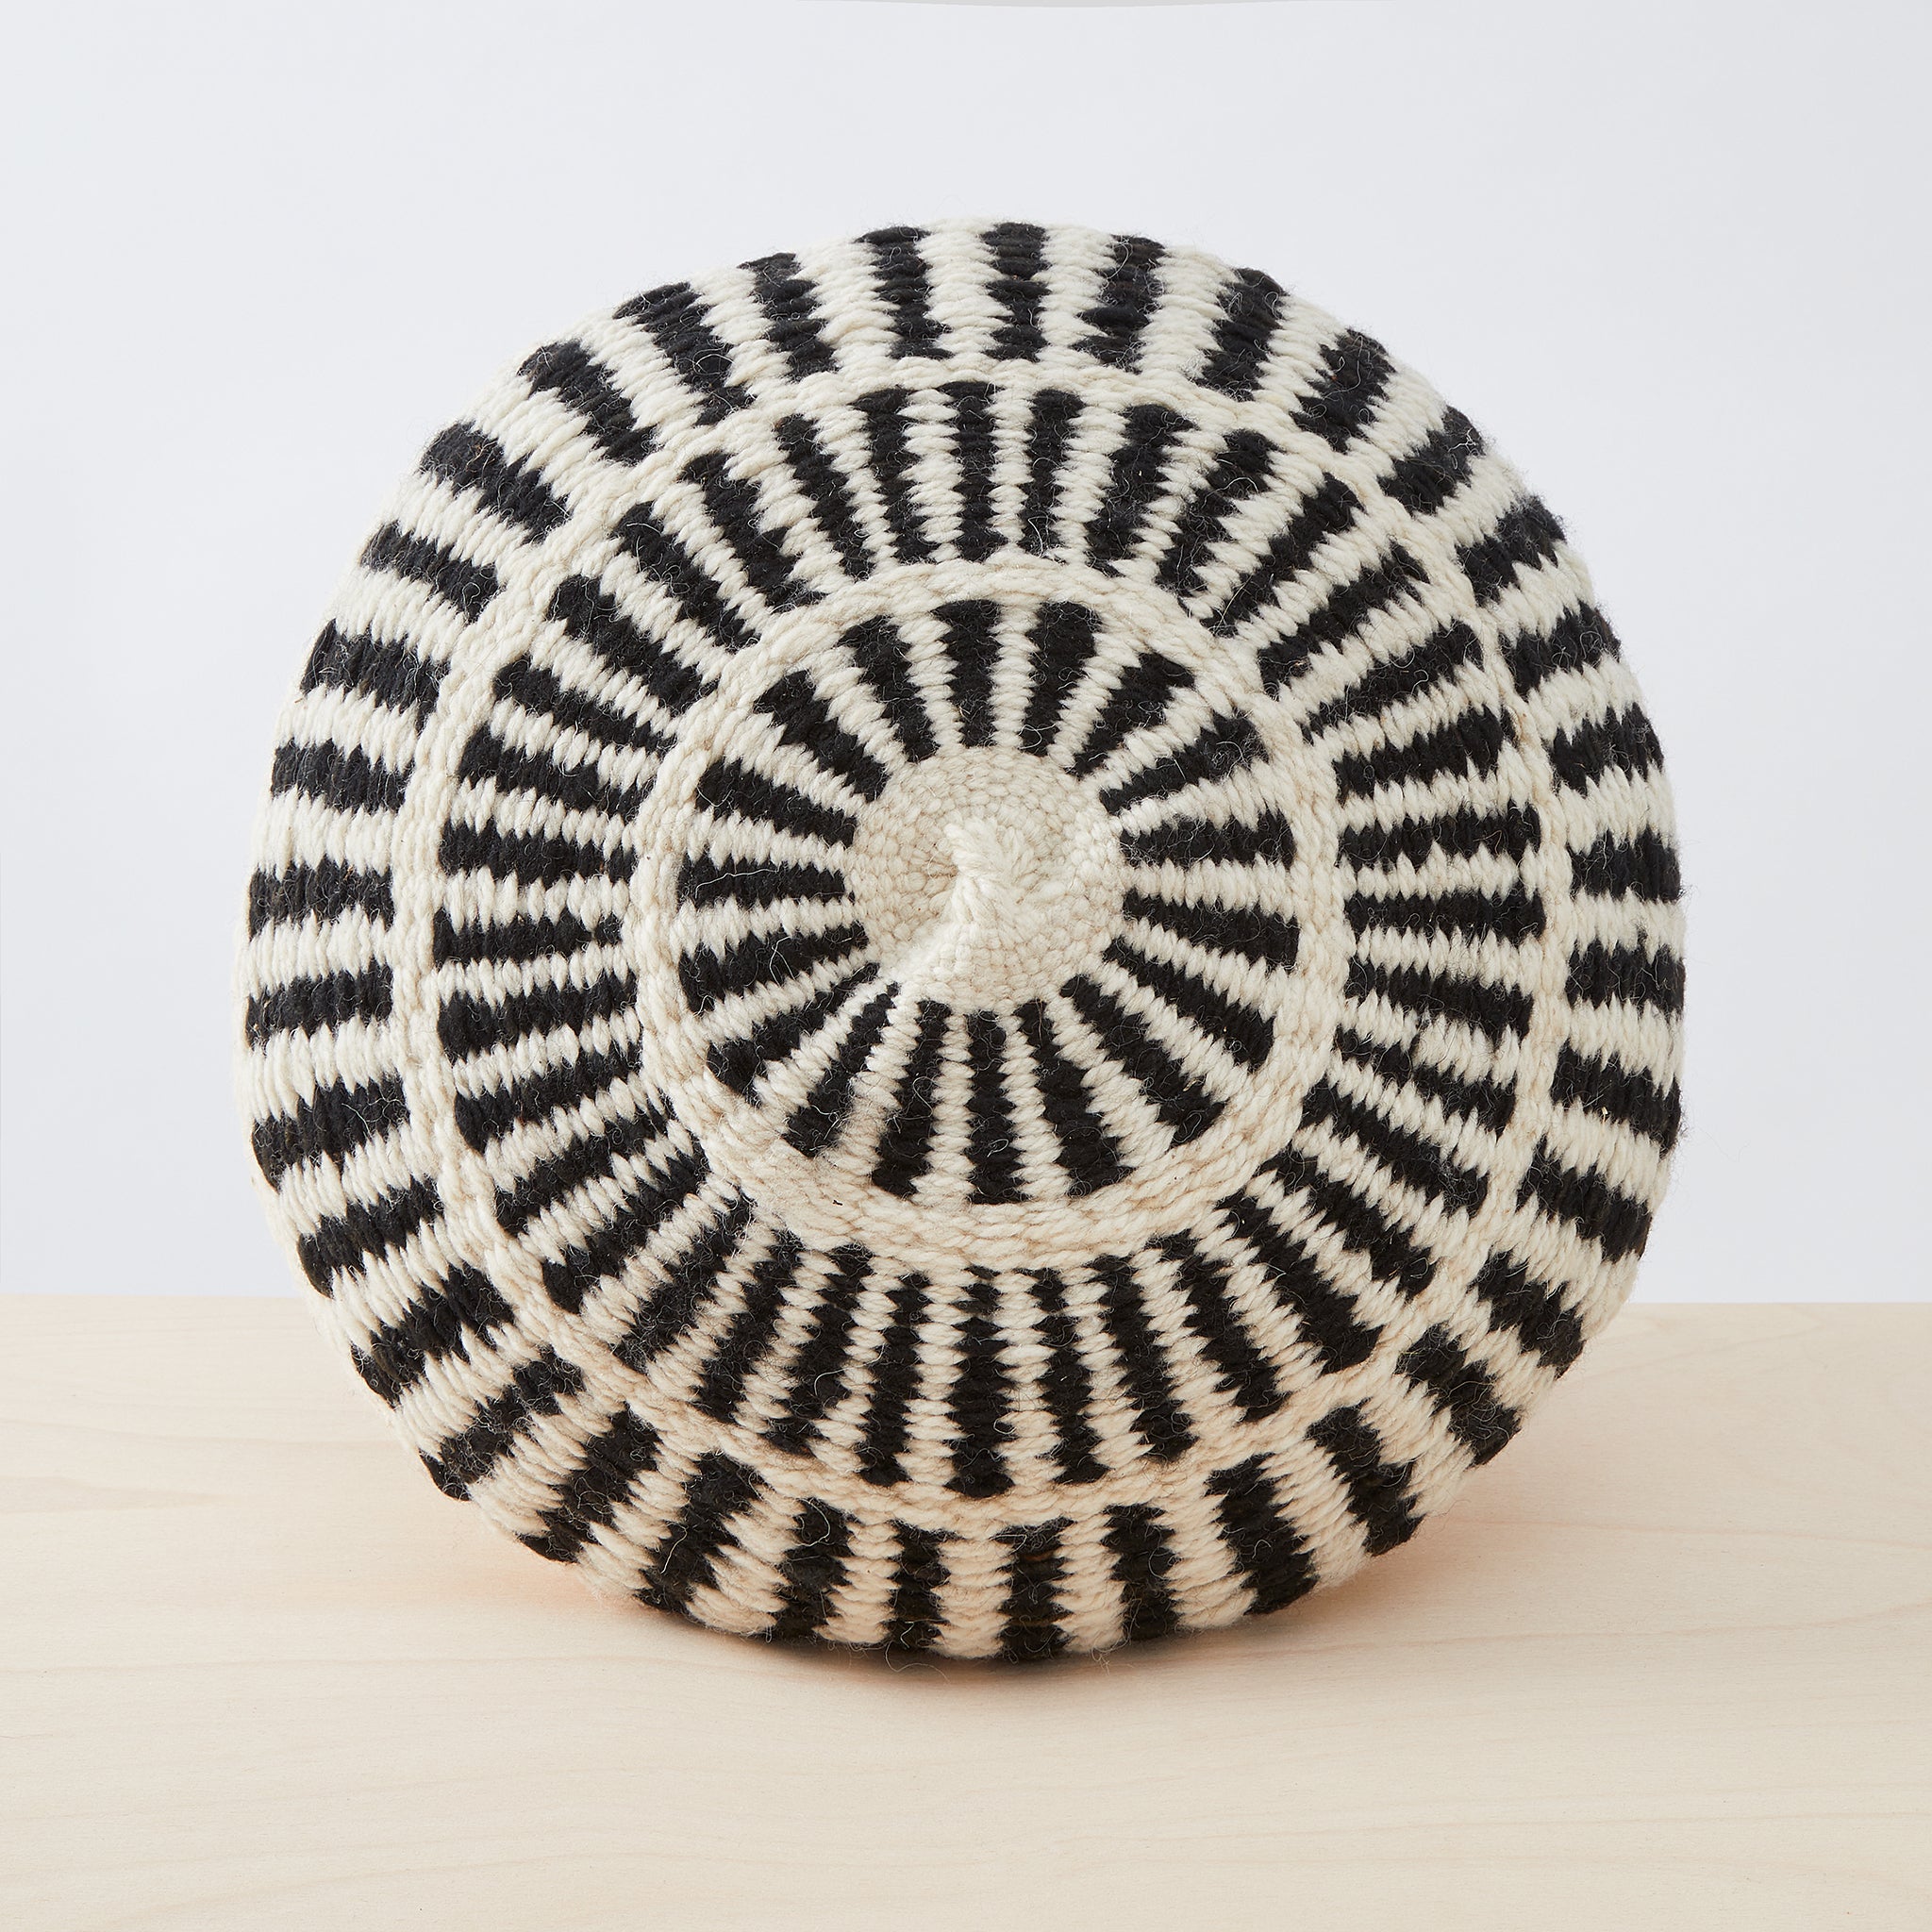 A great eye-catcher on your sofa or in your favourite armchair. Individual, lovingly handmade cushion made from 100% Argentinian sheep's wool with a traditional pattern in natural white & black.